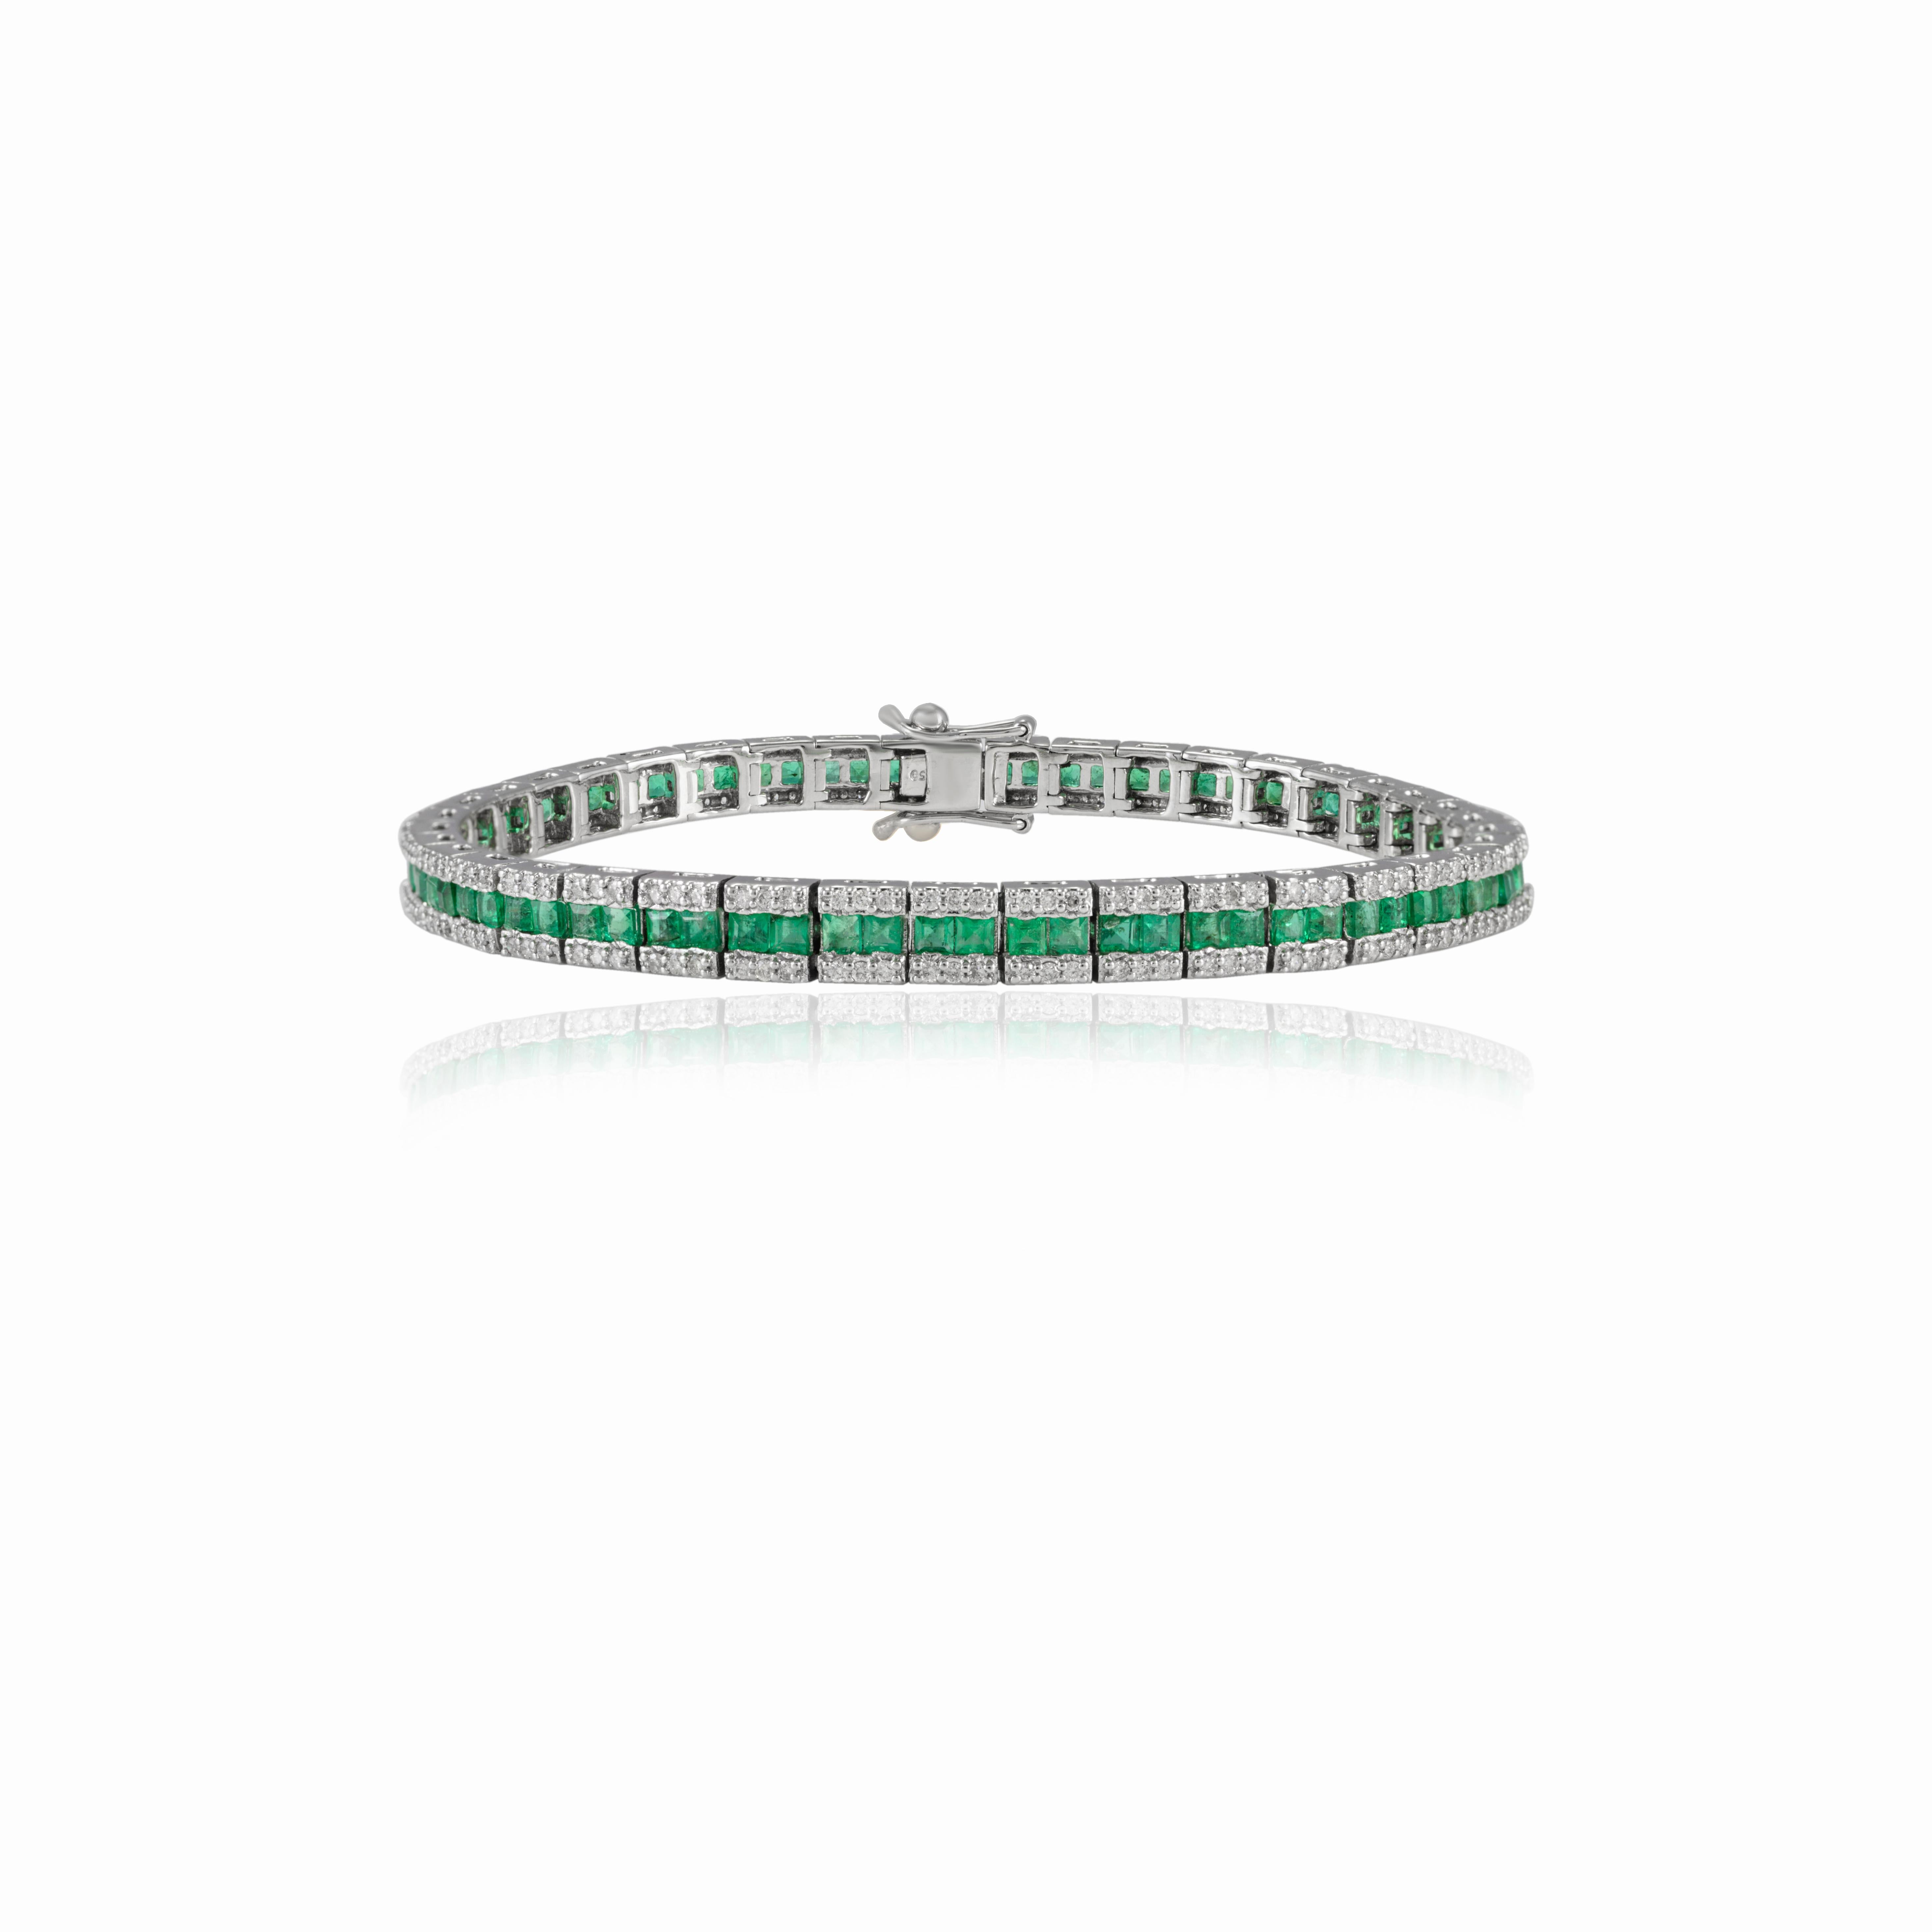 This French Cut Certified Emerald Diamond Tennis Bracelet in 18K gold showcases endlessly sparkling natural emerald, weighing 3.56 carat and diamonds weighing 1.17 carat. It measures 7 inches long in length. 
Emerald enhances intellectual capacity